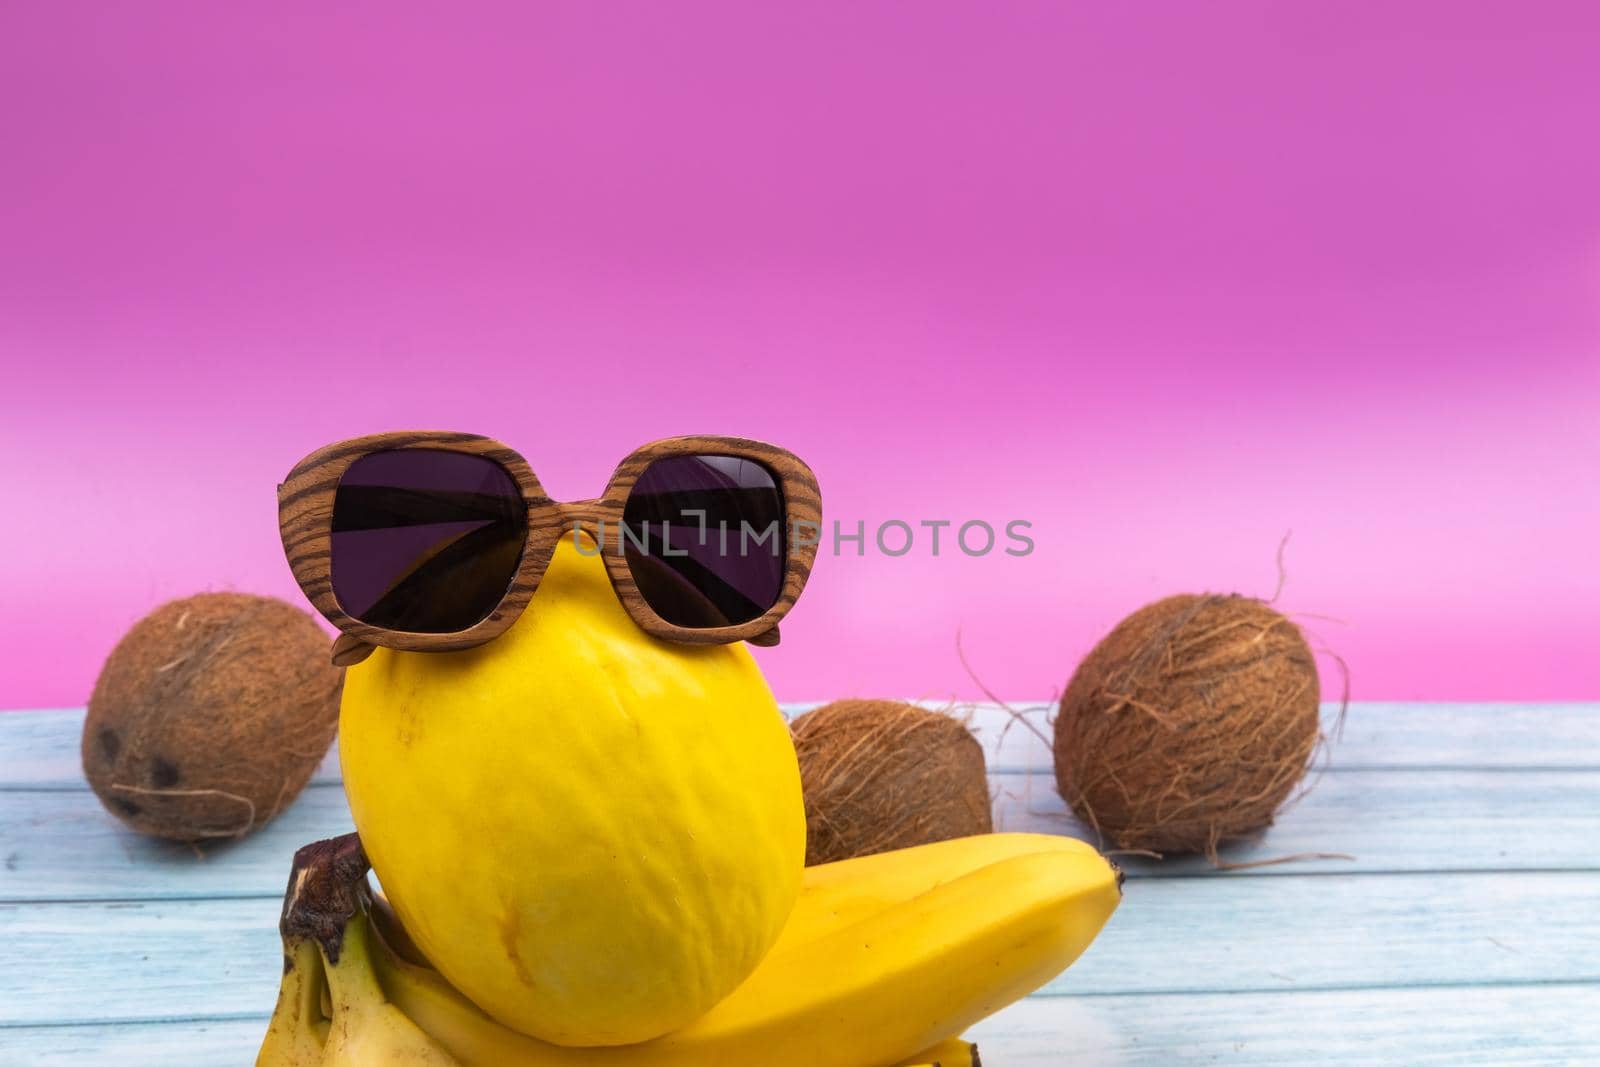 An assortment of yellow fruits and glasses lies on a pink background.